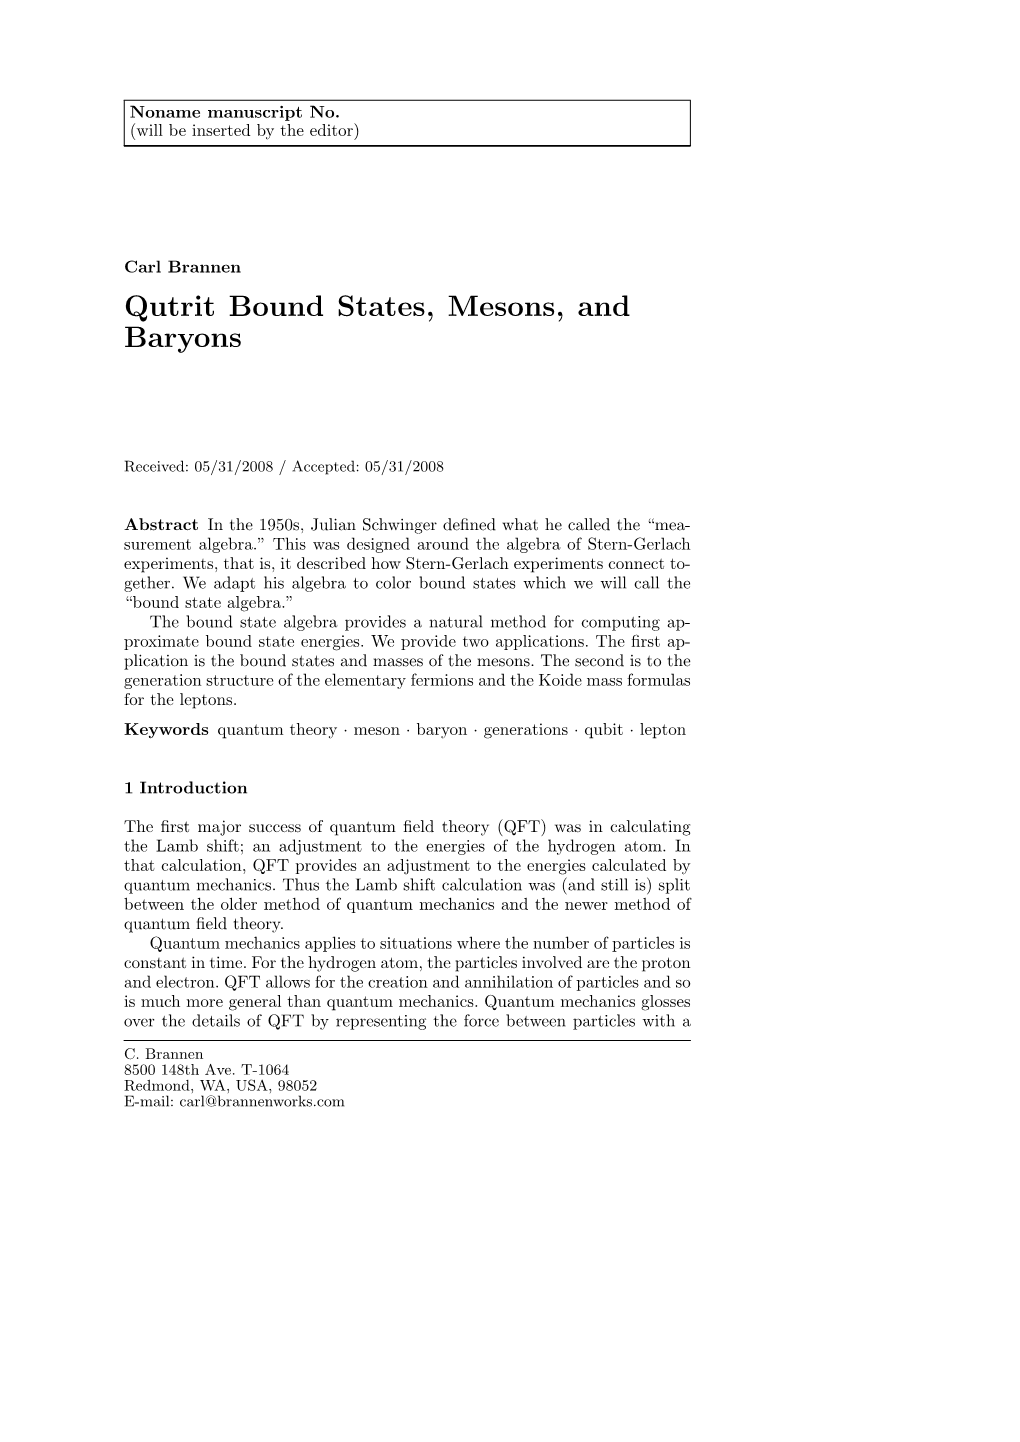 Qutrit Bound States, Mesons, and Baryons